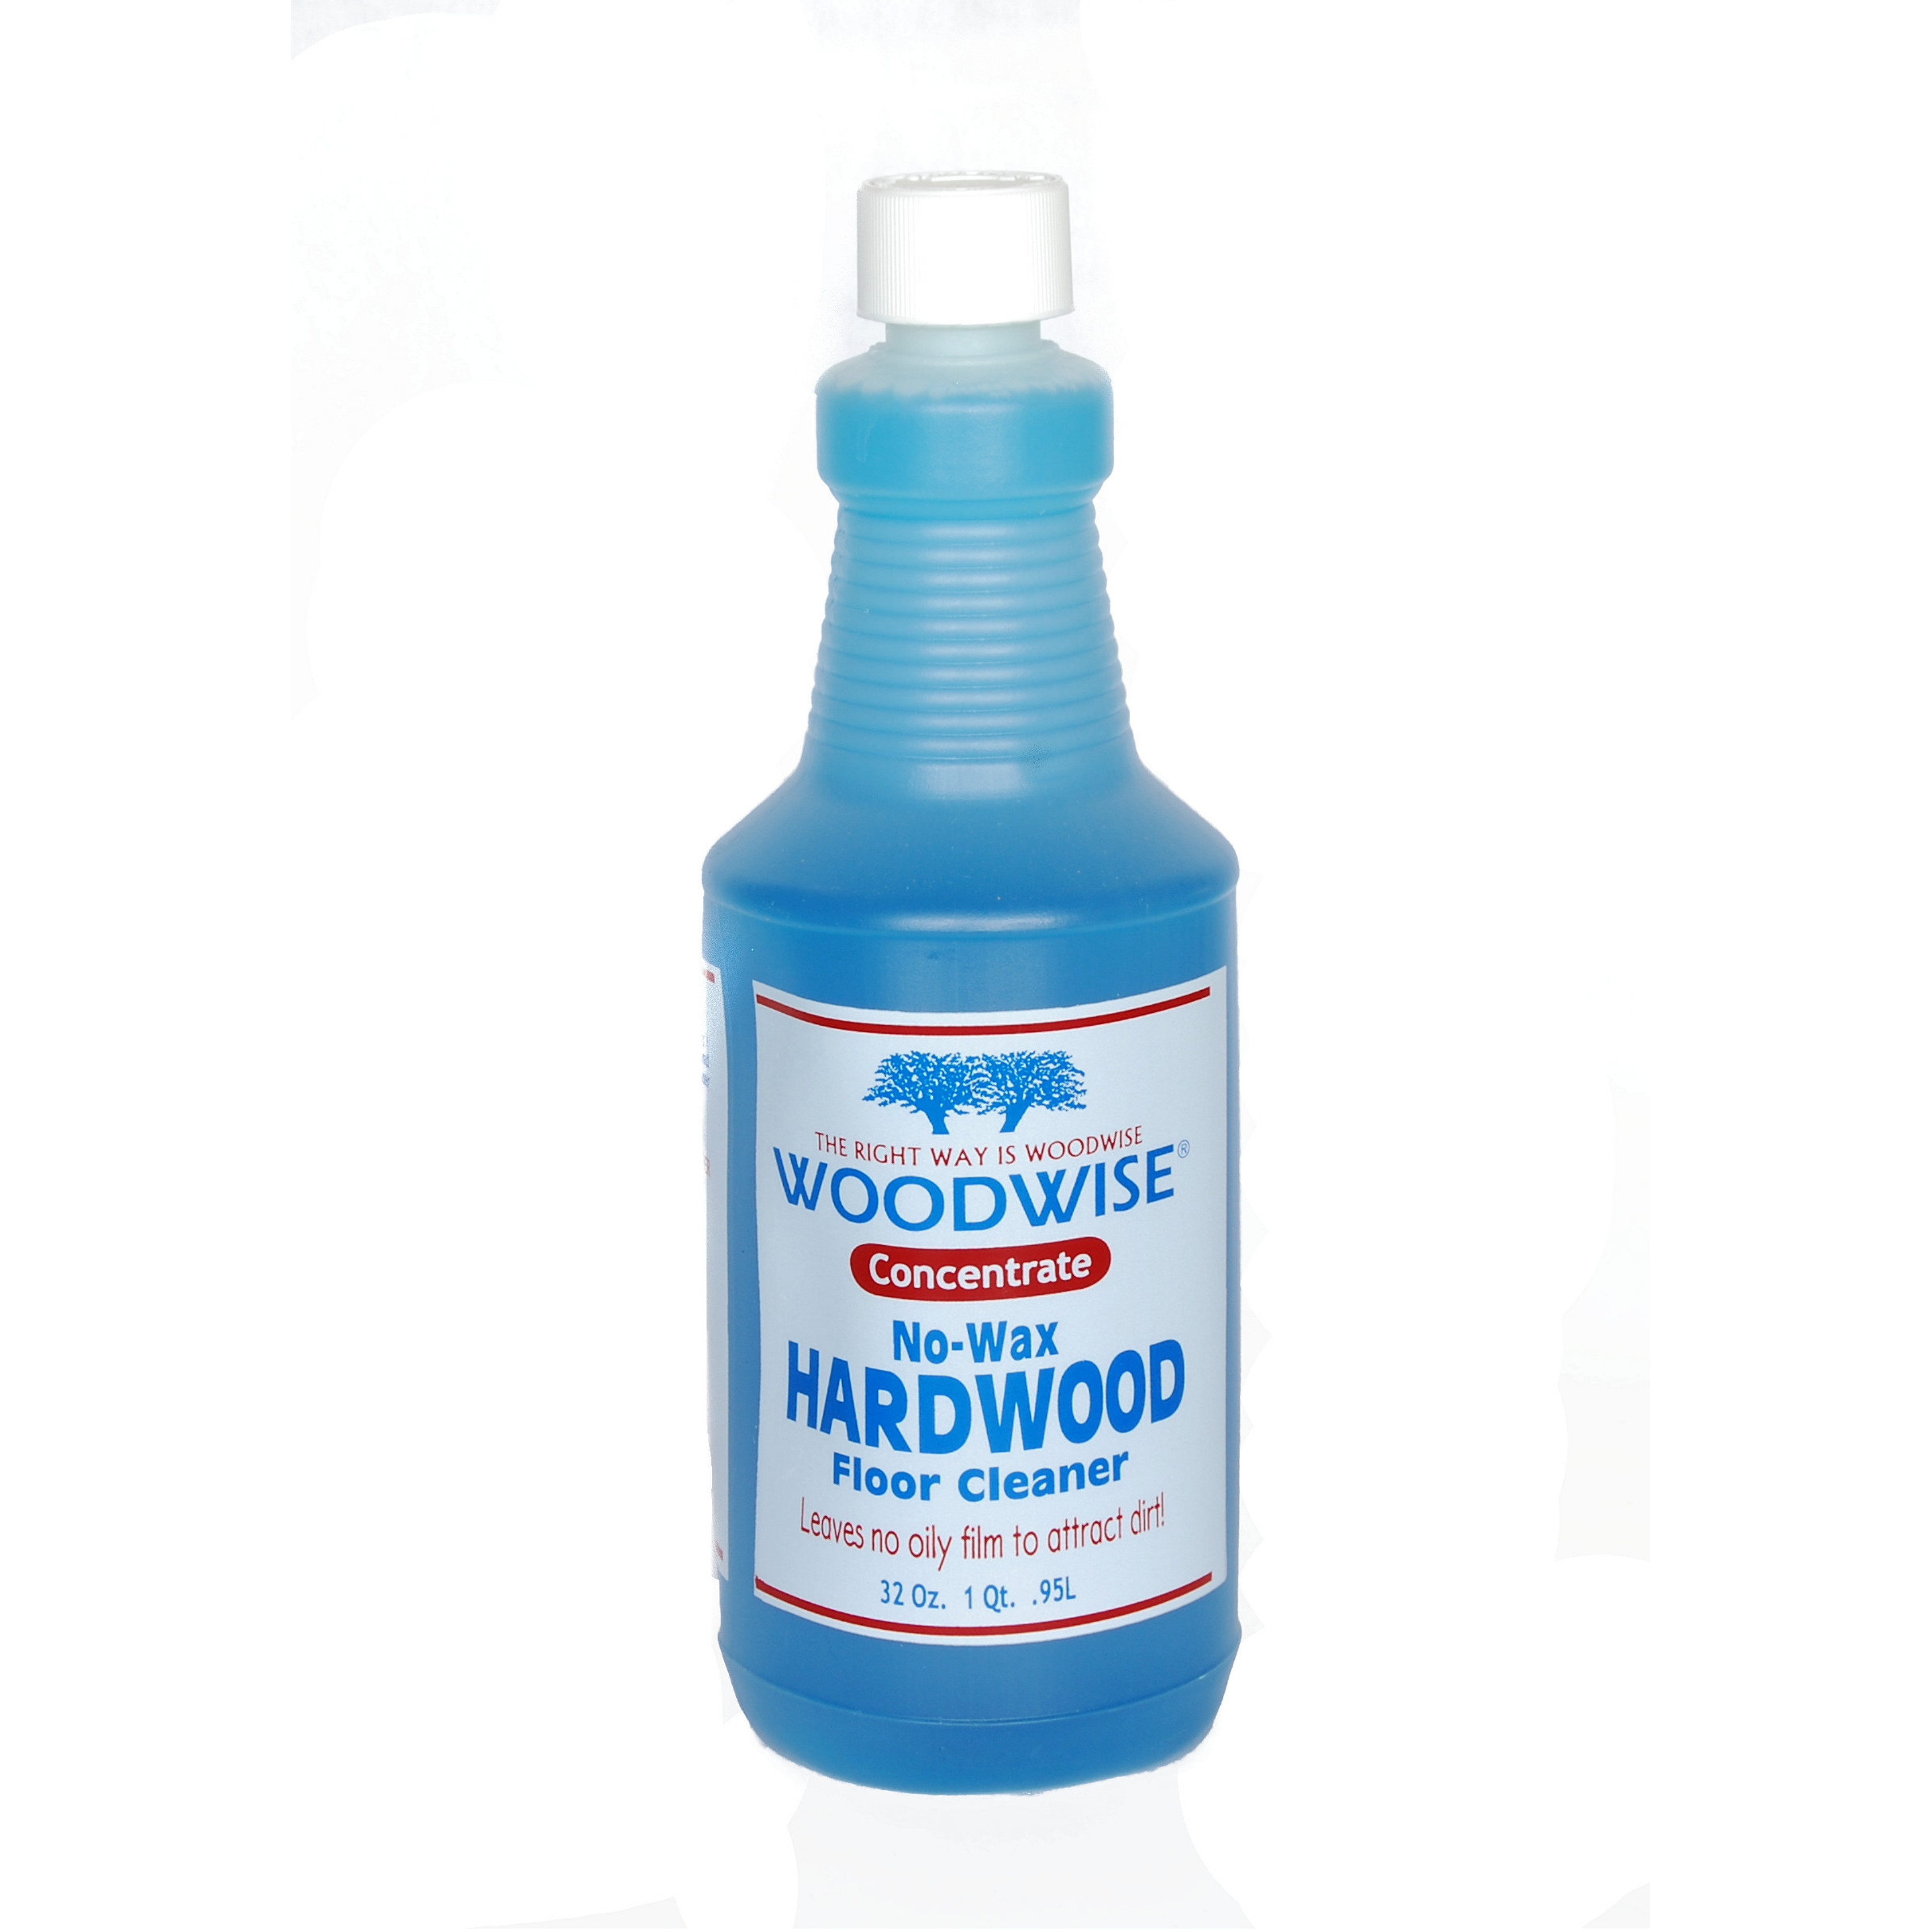 16 Famous Bona Hardwood Floor Cleaner 32 Oz 2024 free download bona hardwood floor cleaner 32 oz of bruce 32 oz hardwood and laminate floor cleaner trigger light throughout woodwise 32oz concentrate no wax hardwood floor cleaner